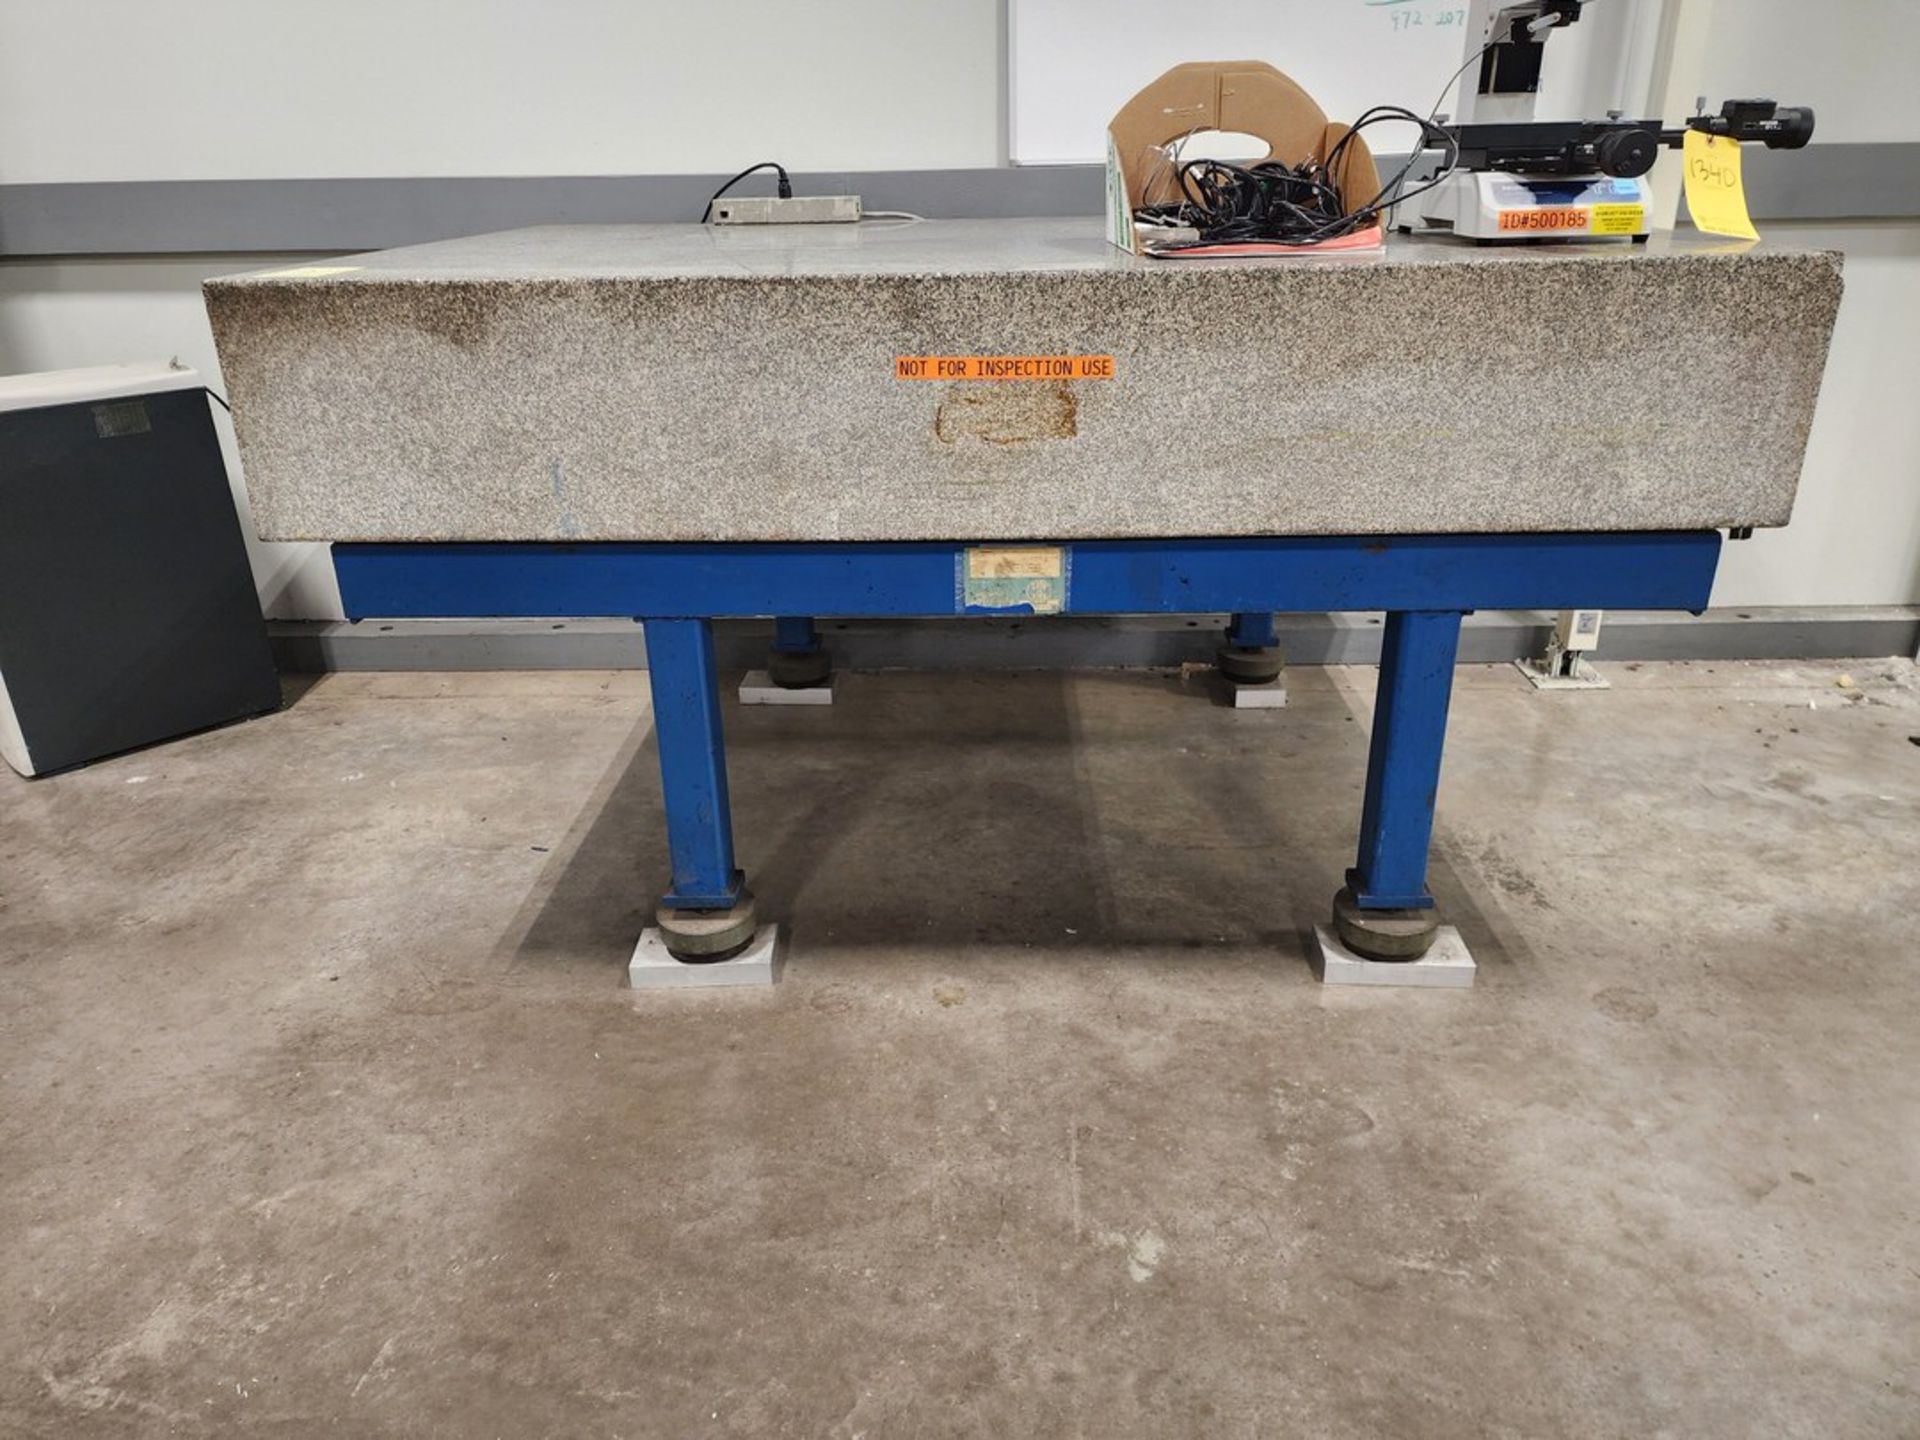 Surface Granite Plate 72" x 48" x 12-1/2" W/ Stand (Asset# 1082733) - Image 2 of 3